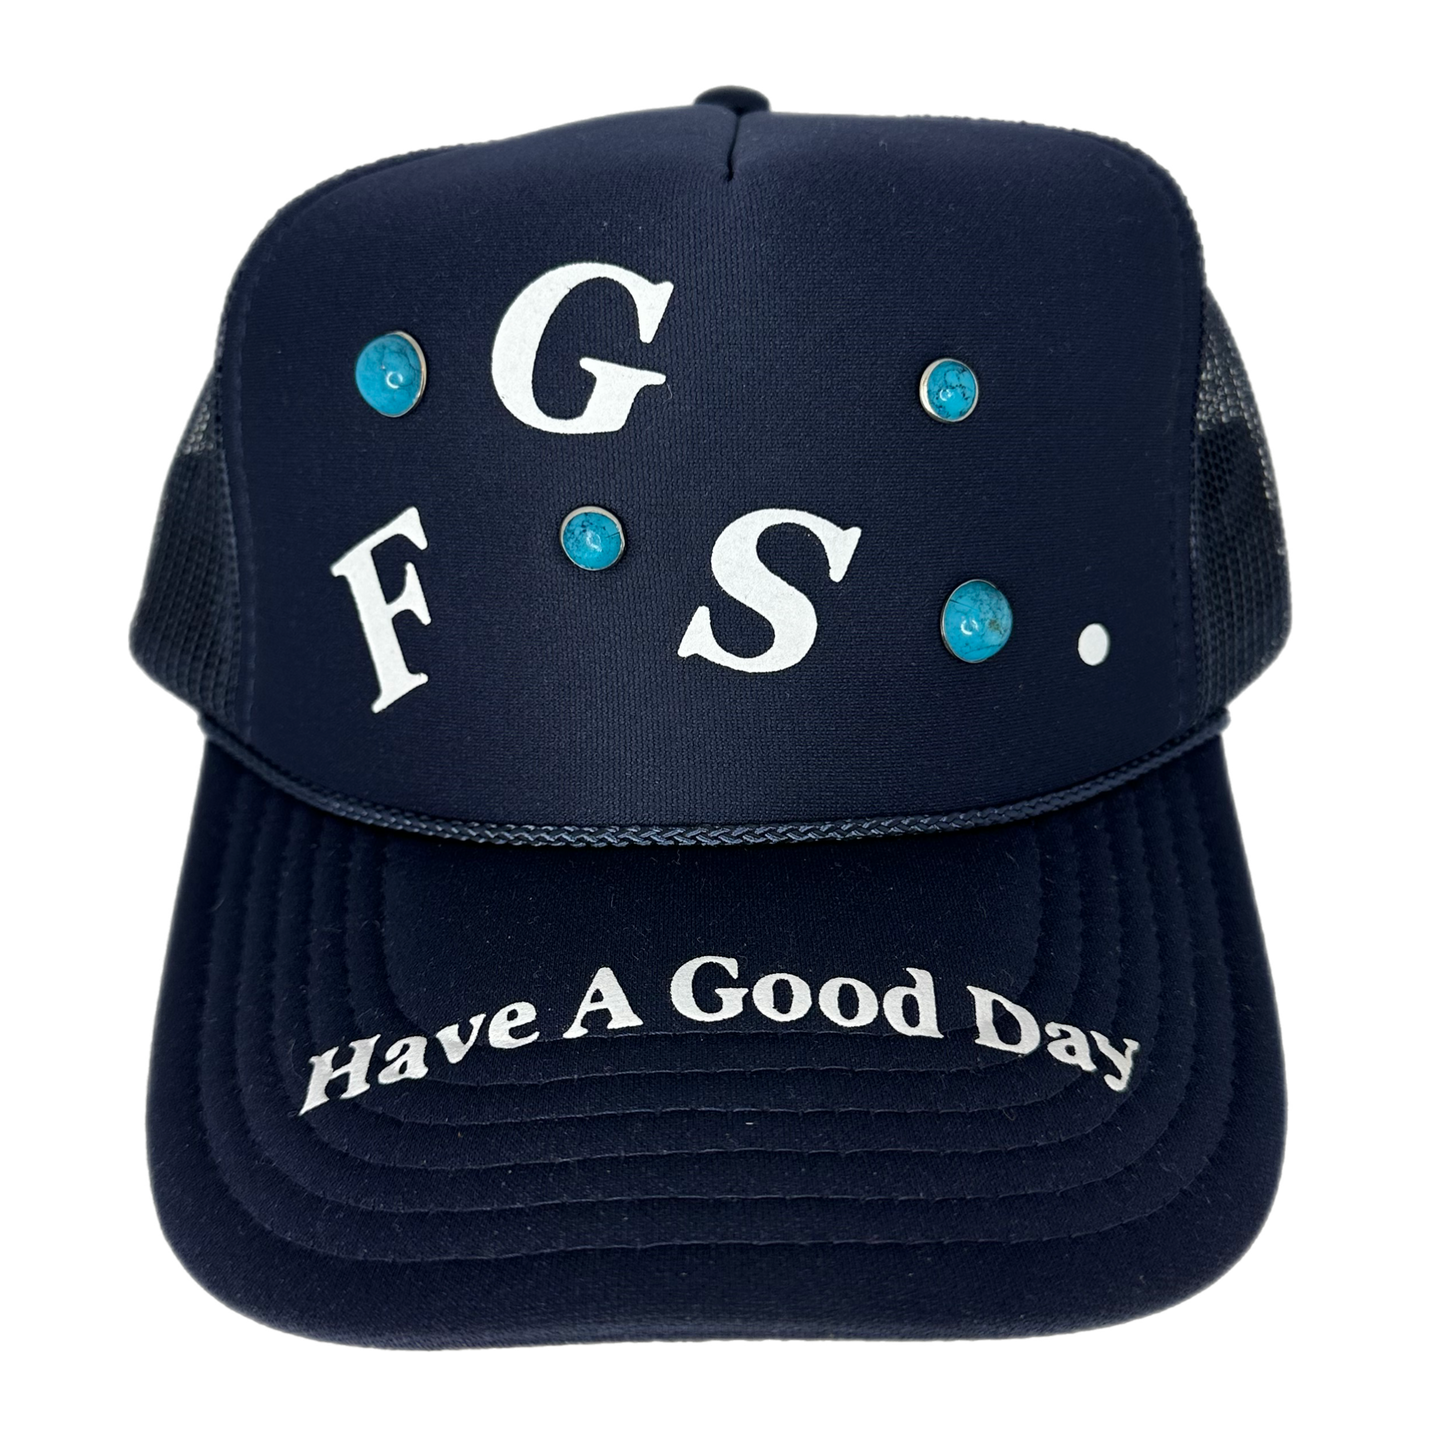 For Good Services - " Have A Good Day Trucker Hat" - Blue